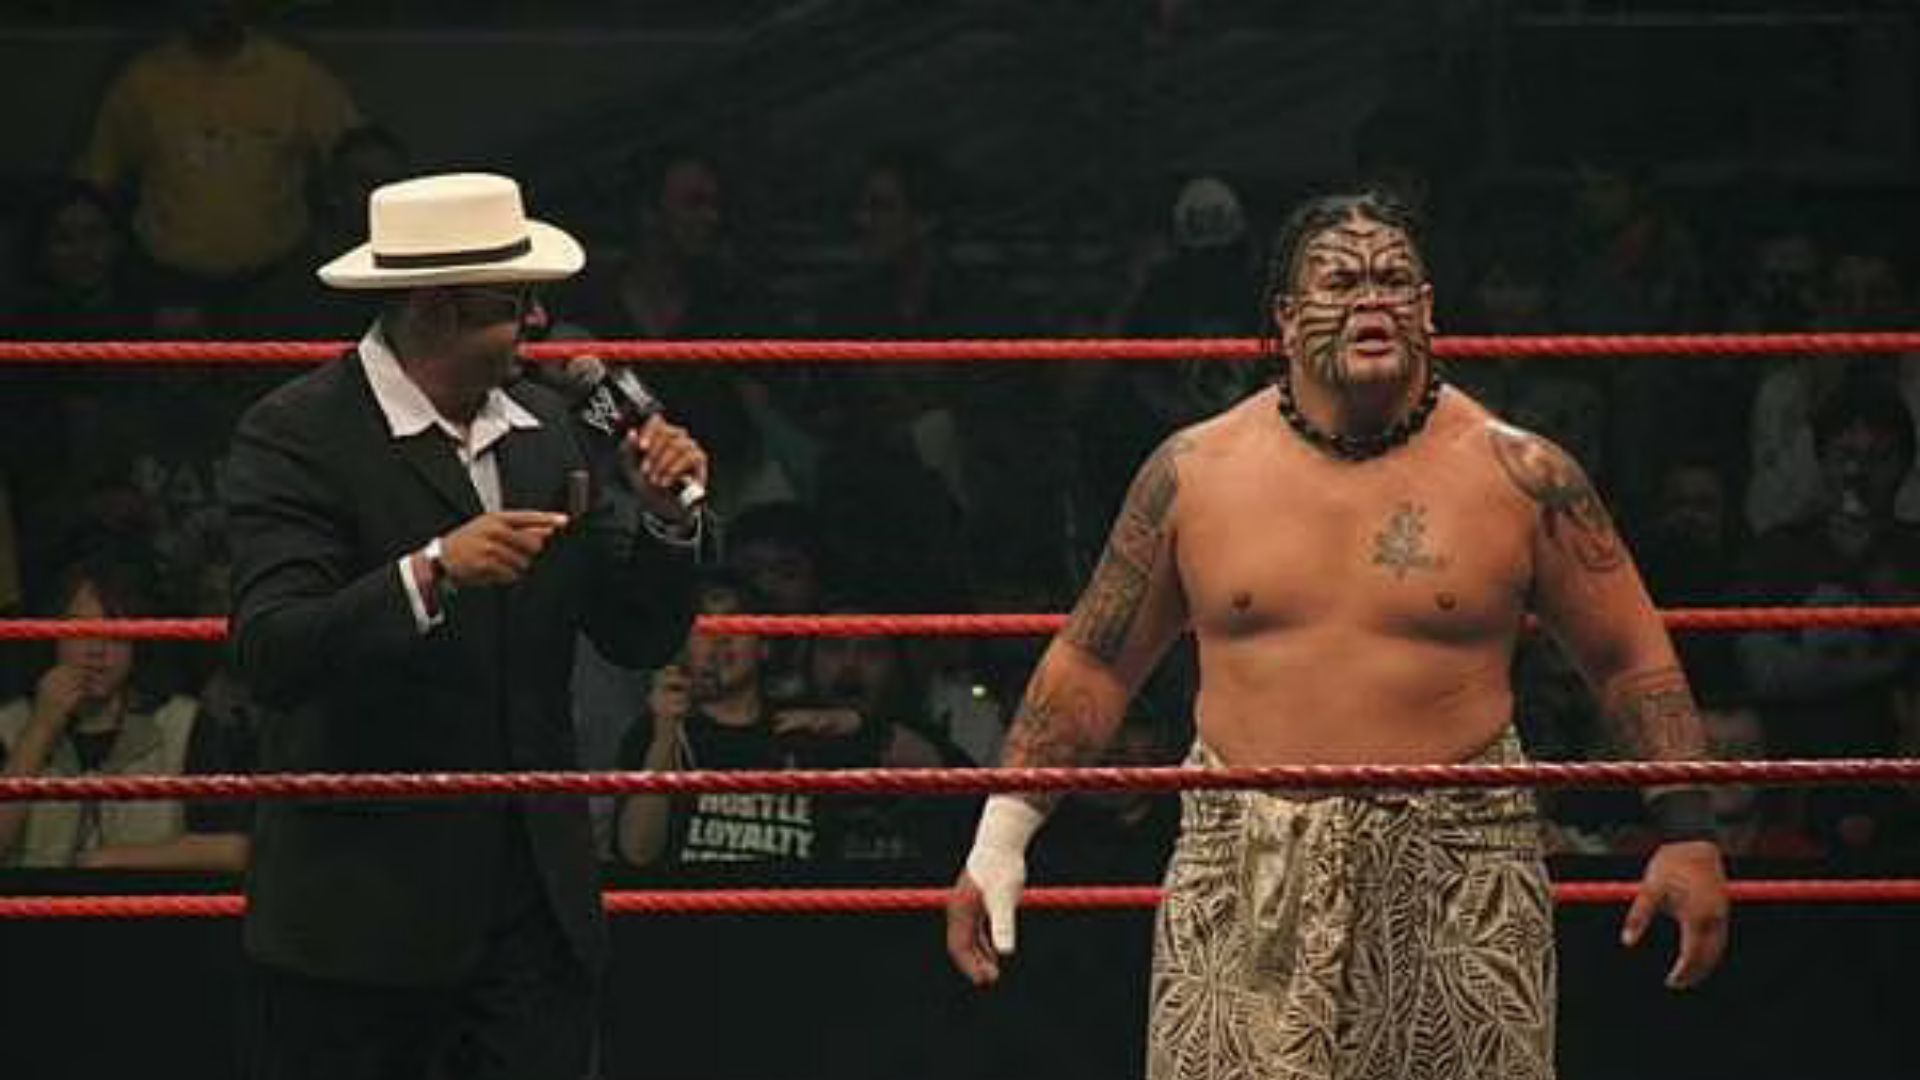 Umaga was one of the best heels in WWE prior to his passing in 2009